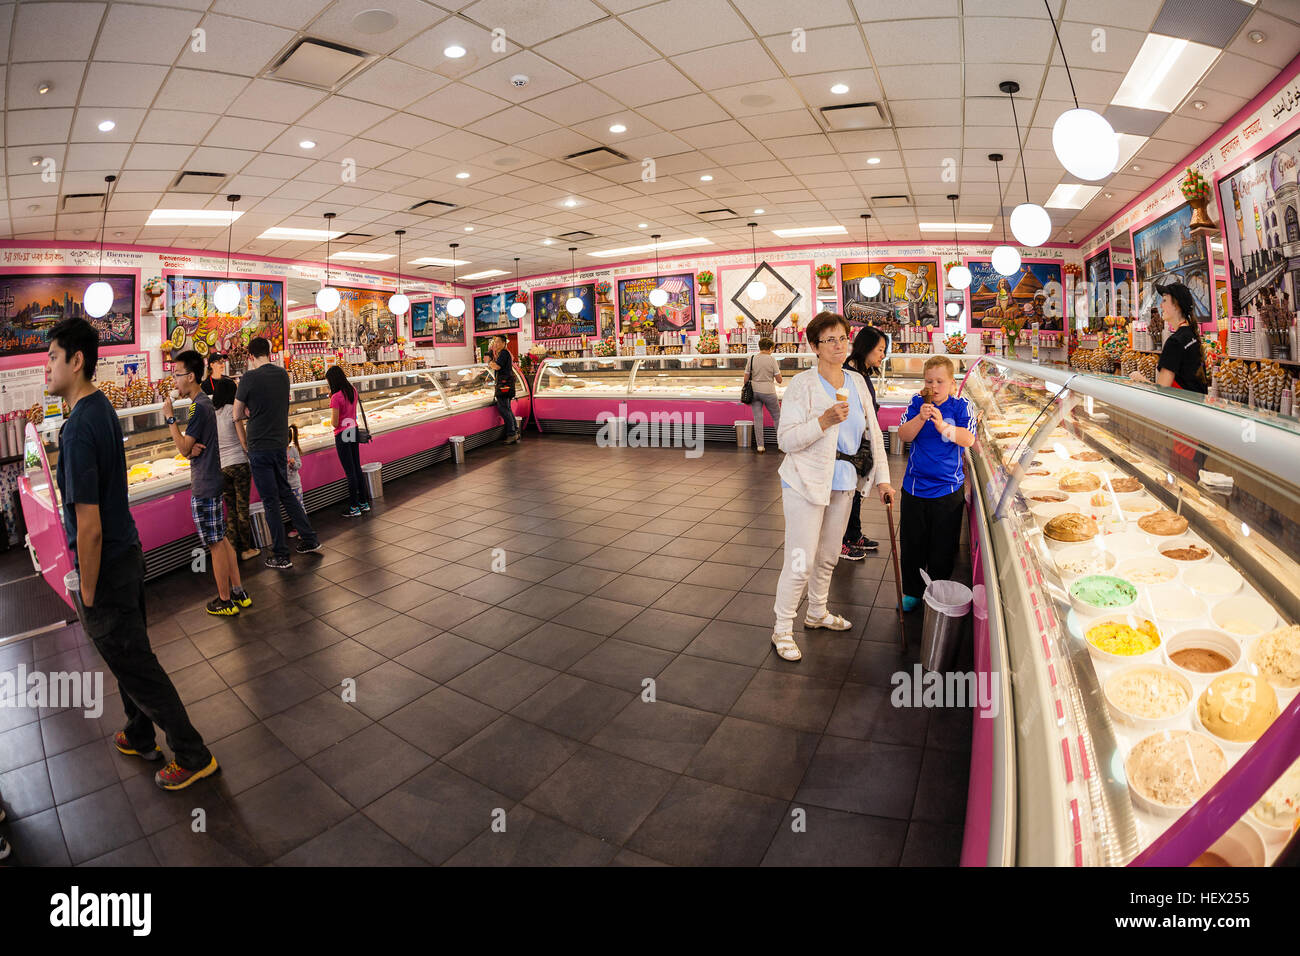 Vancouver, Canada - July 11, 2016: Customers at the famous La Casa Gelato shop in Vancouver. It is renowned as the only ice cream shop in the world to Stock Photo